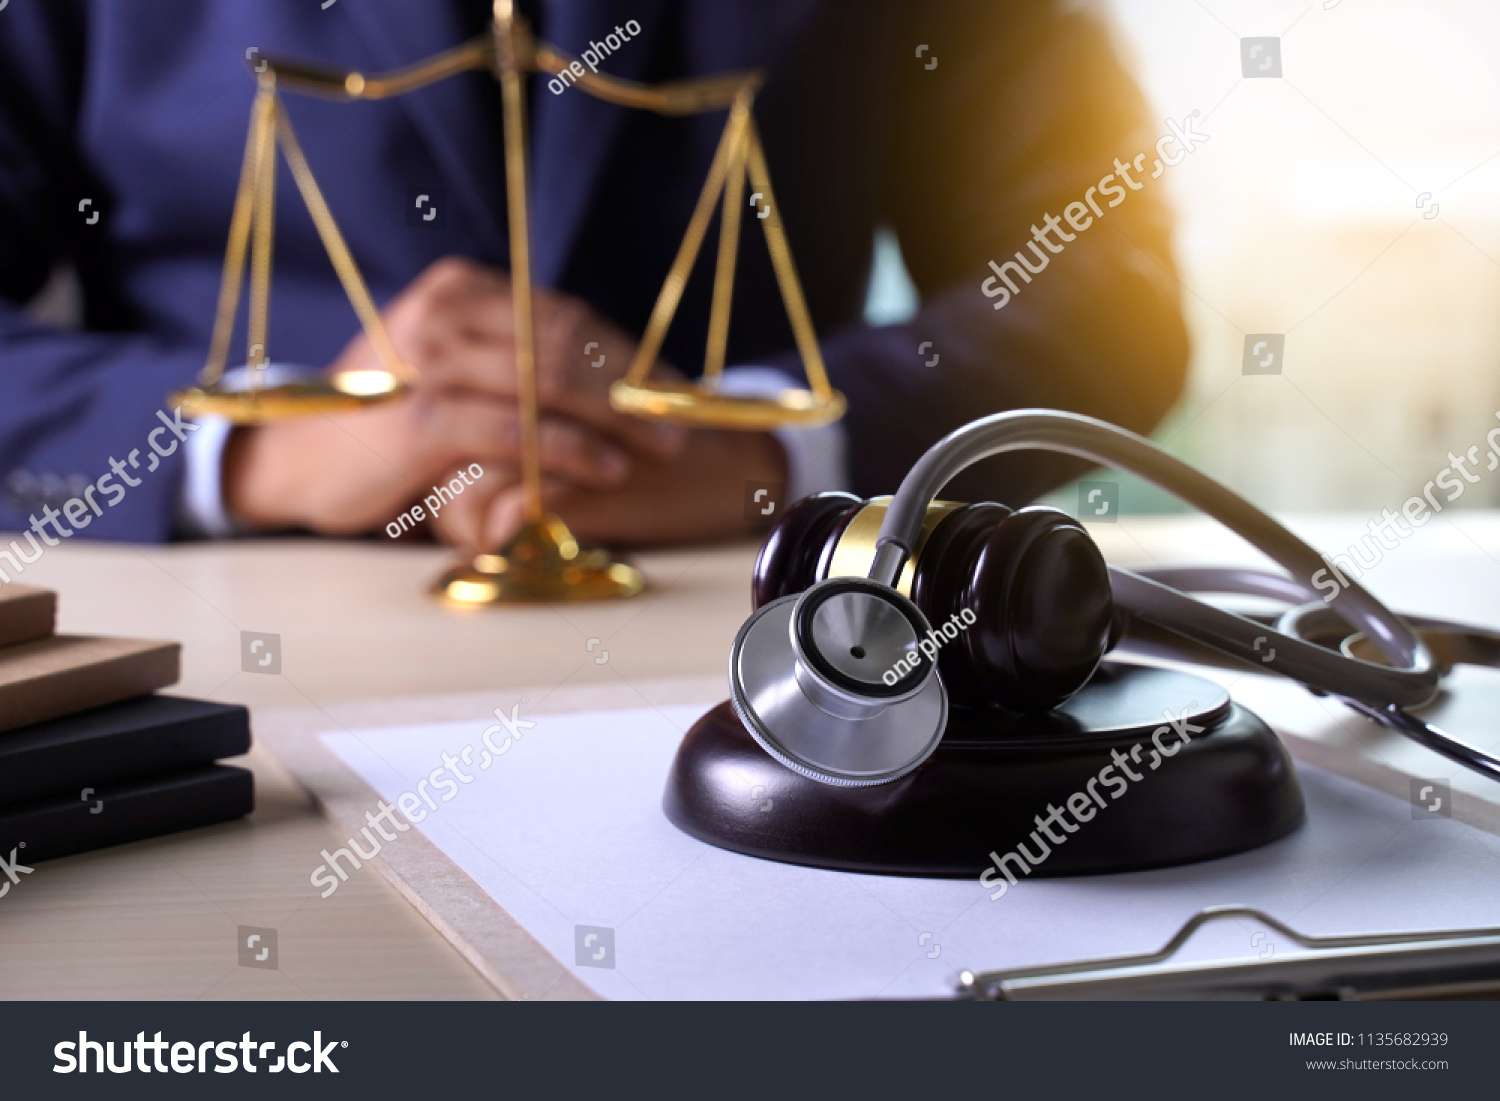 lawyer-at-desk-with-justice-scale-and-stethoscope